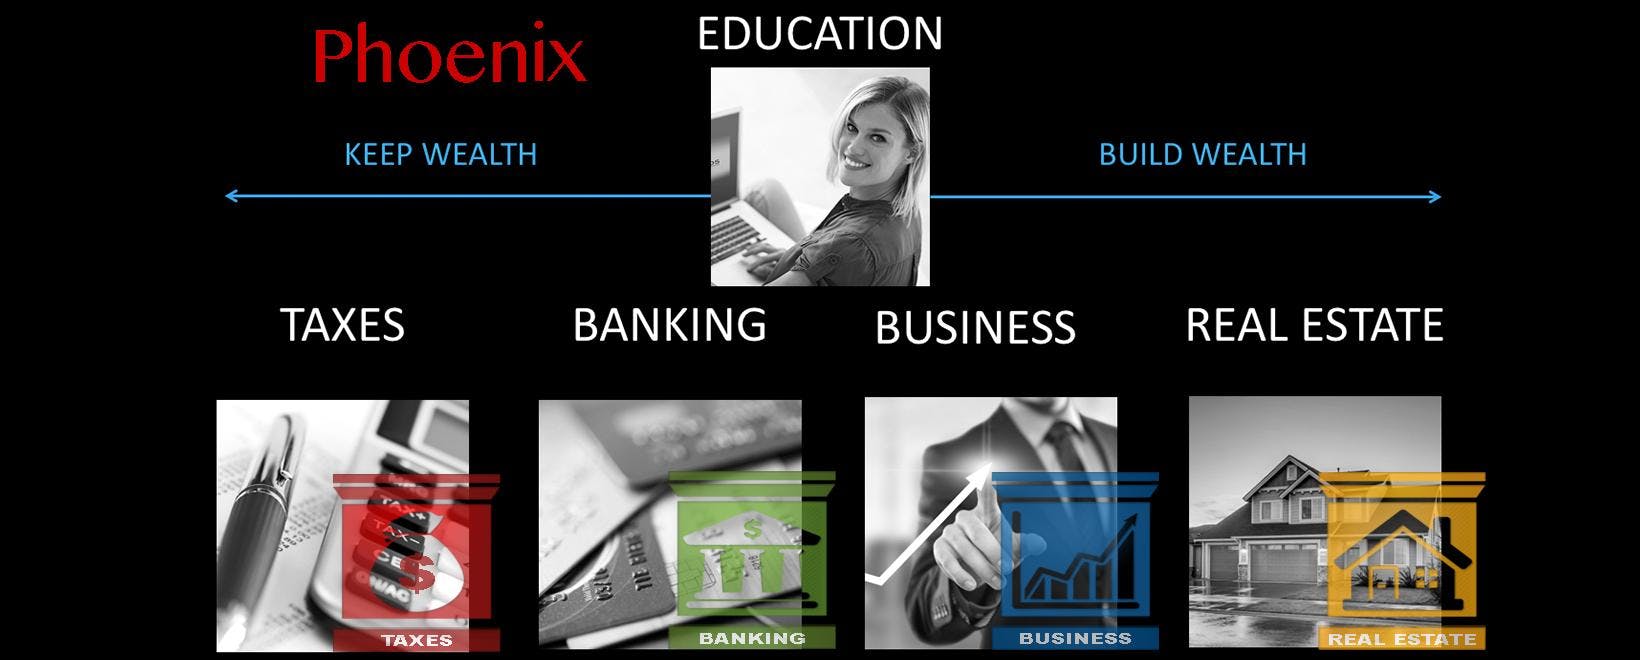 Secrets and Systems of Real Estate and Wealth Creation - Phoenix, AZ 85016